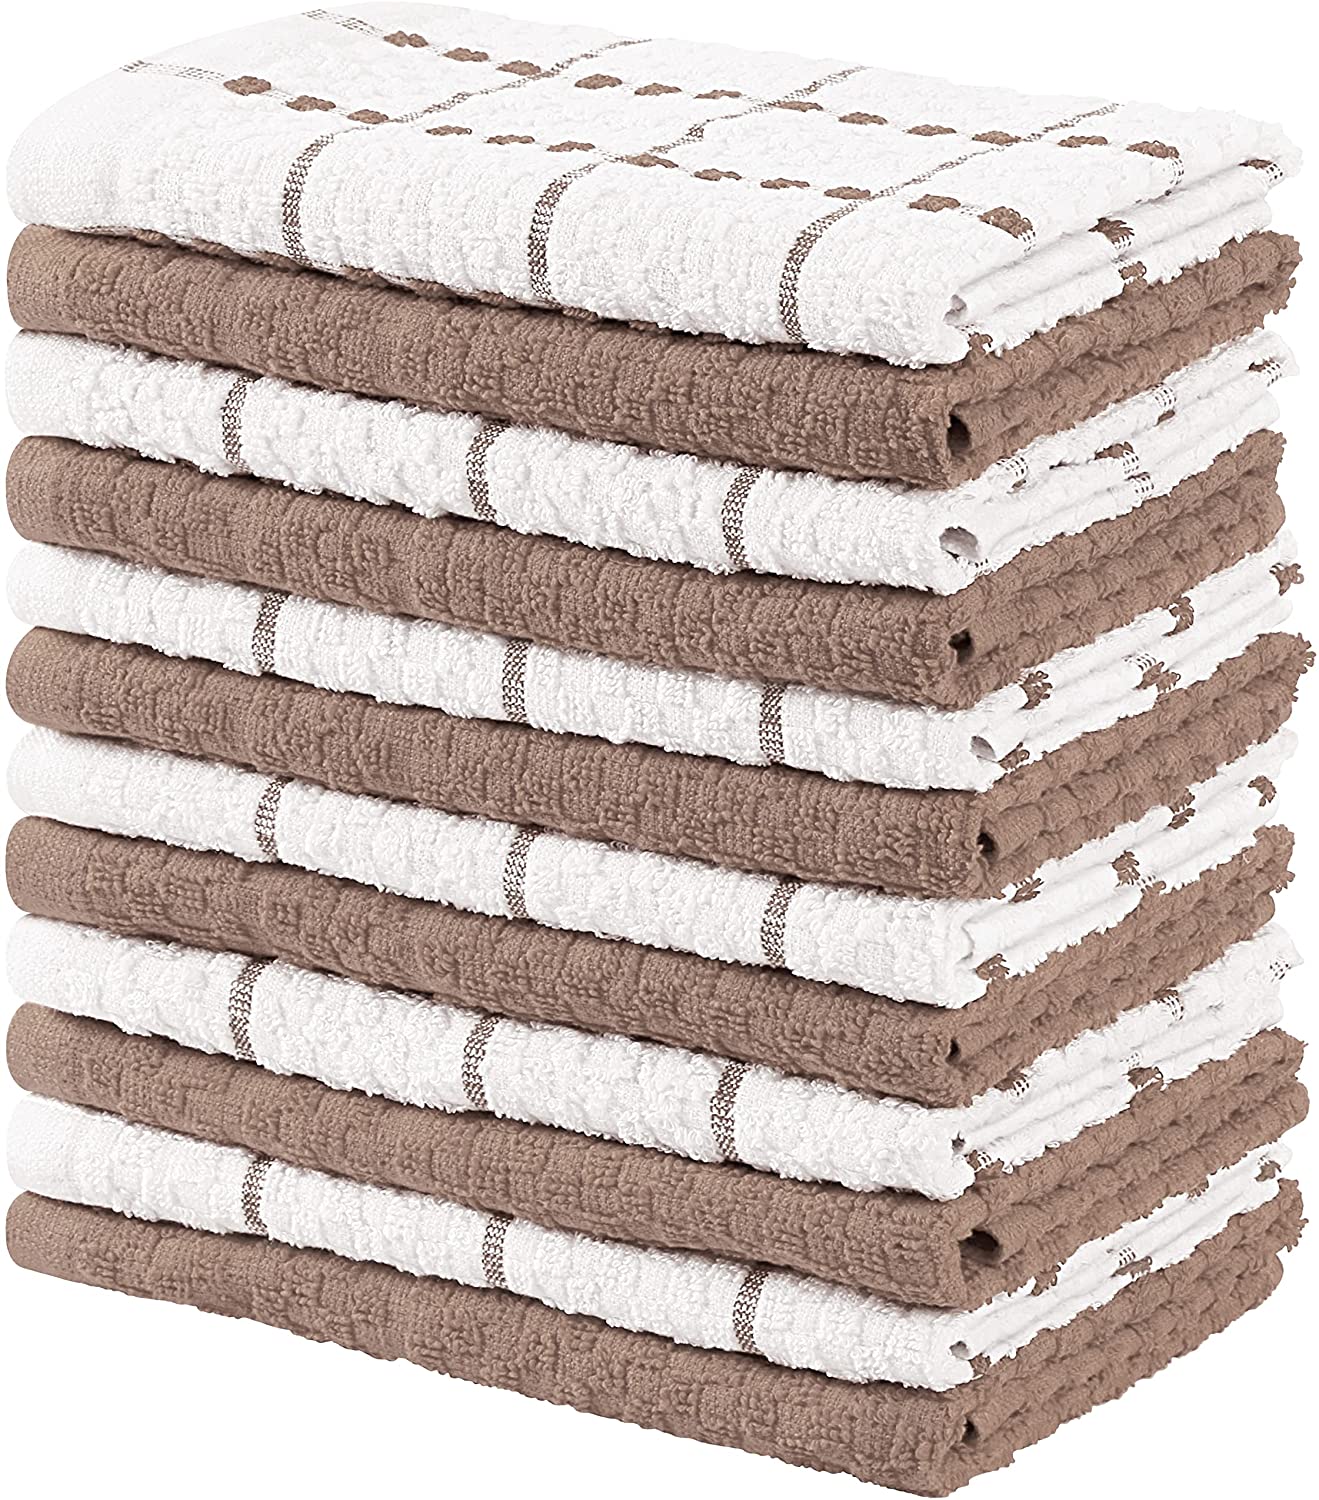  Utopia Towels Kitchen Towels [6 Pack], 15 x 25 Inches